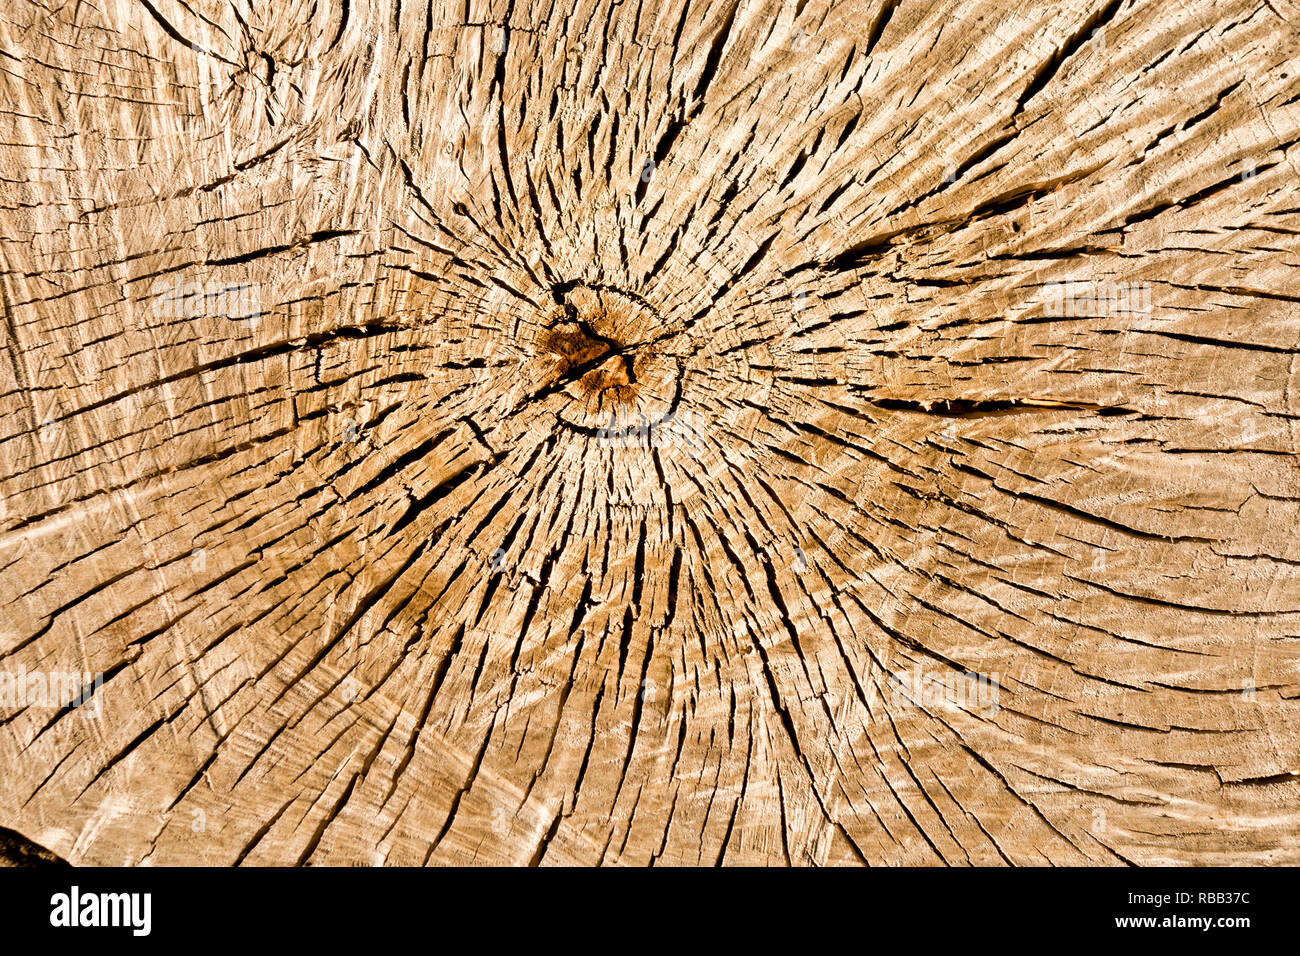 cut tree with tree rings visible, used for dating the tree age Stock Photo  - Alamy